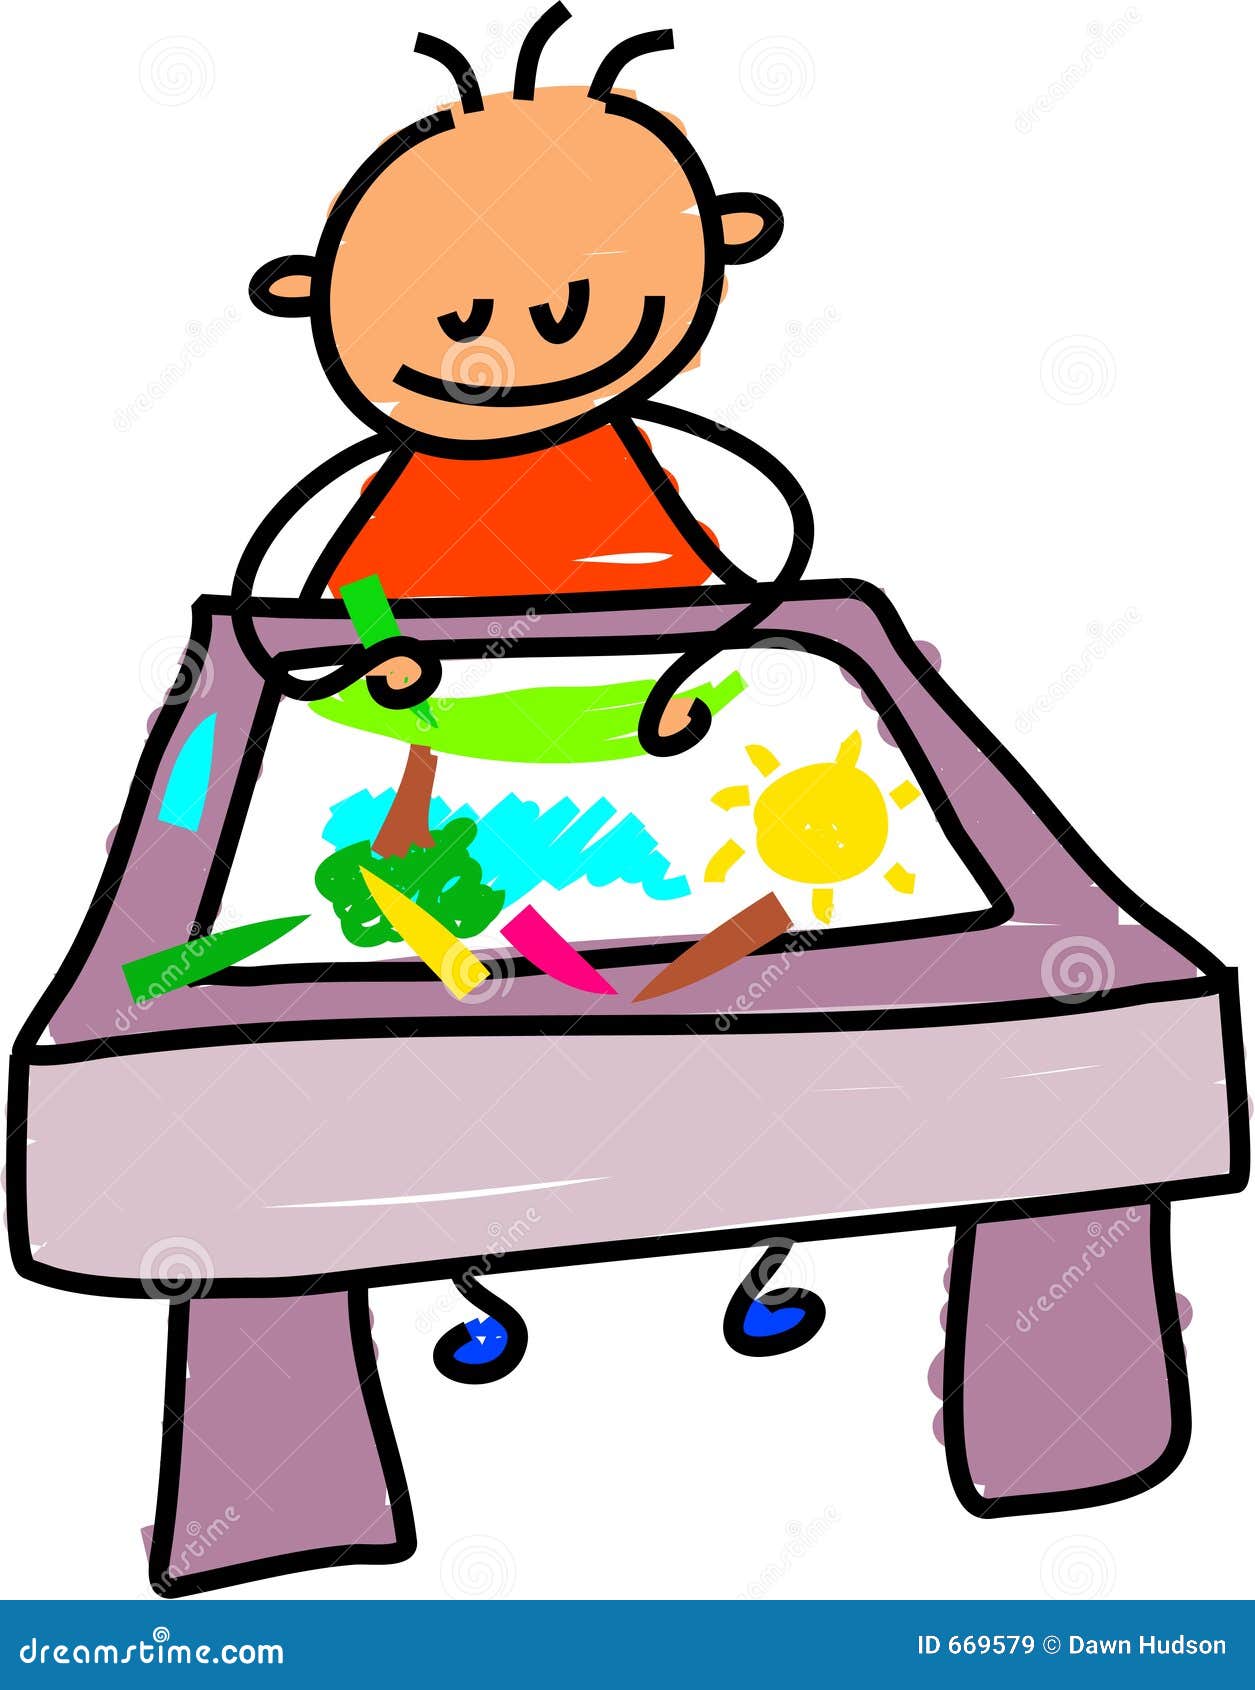 draw clipart online - photo #39